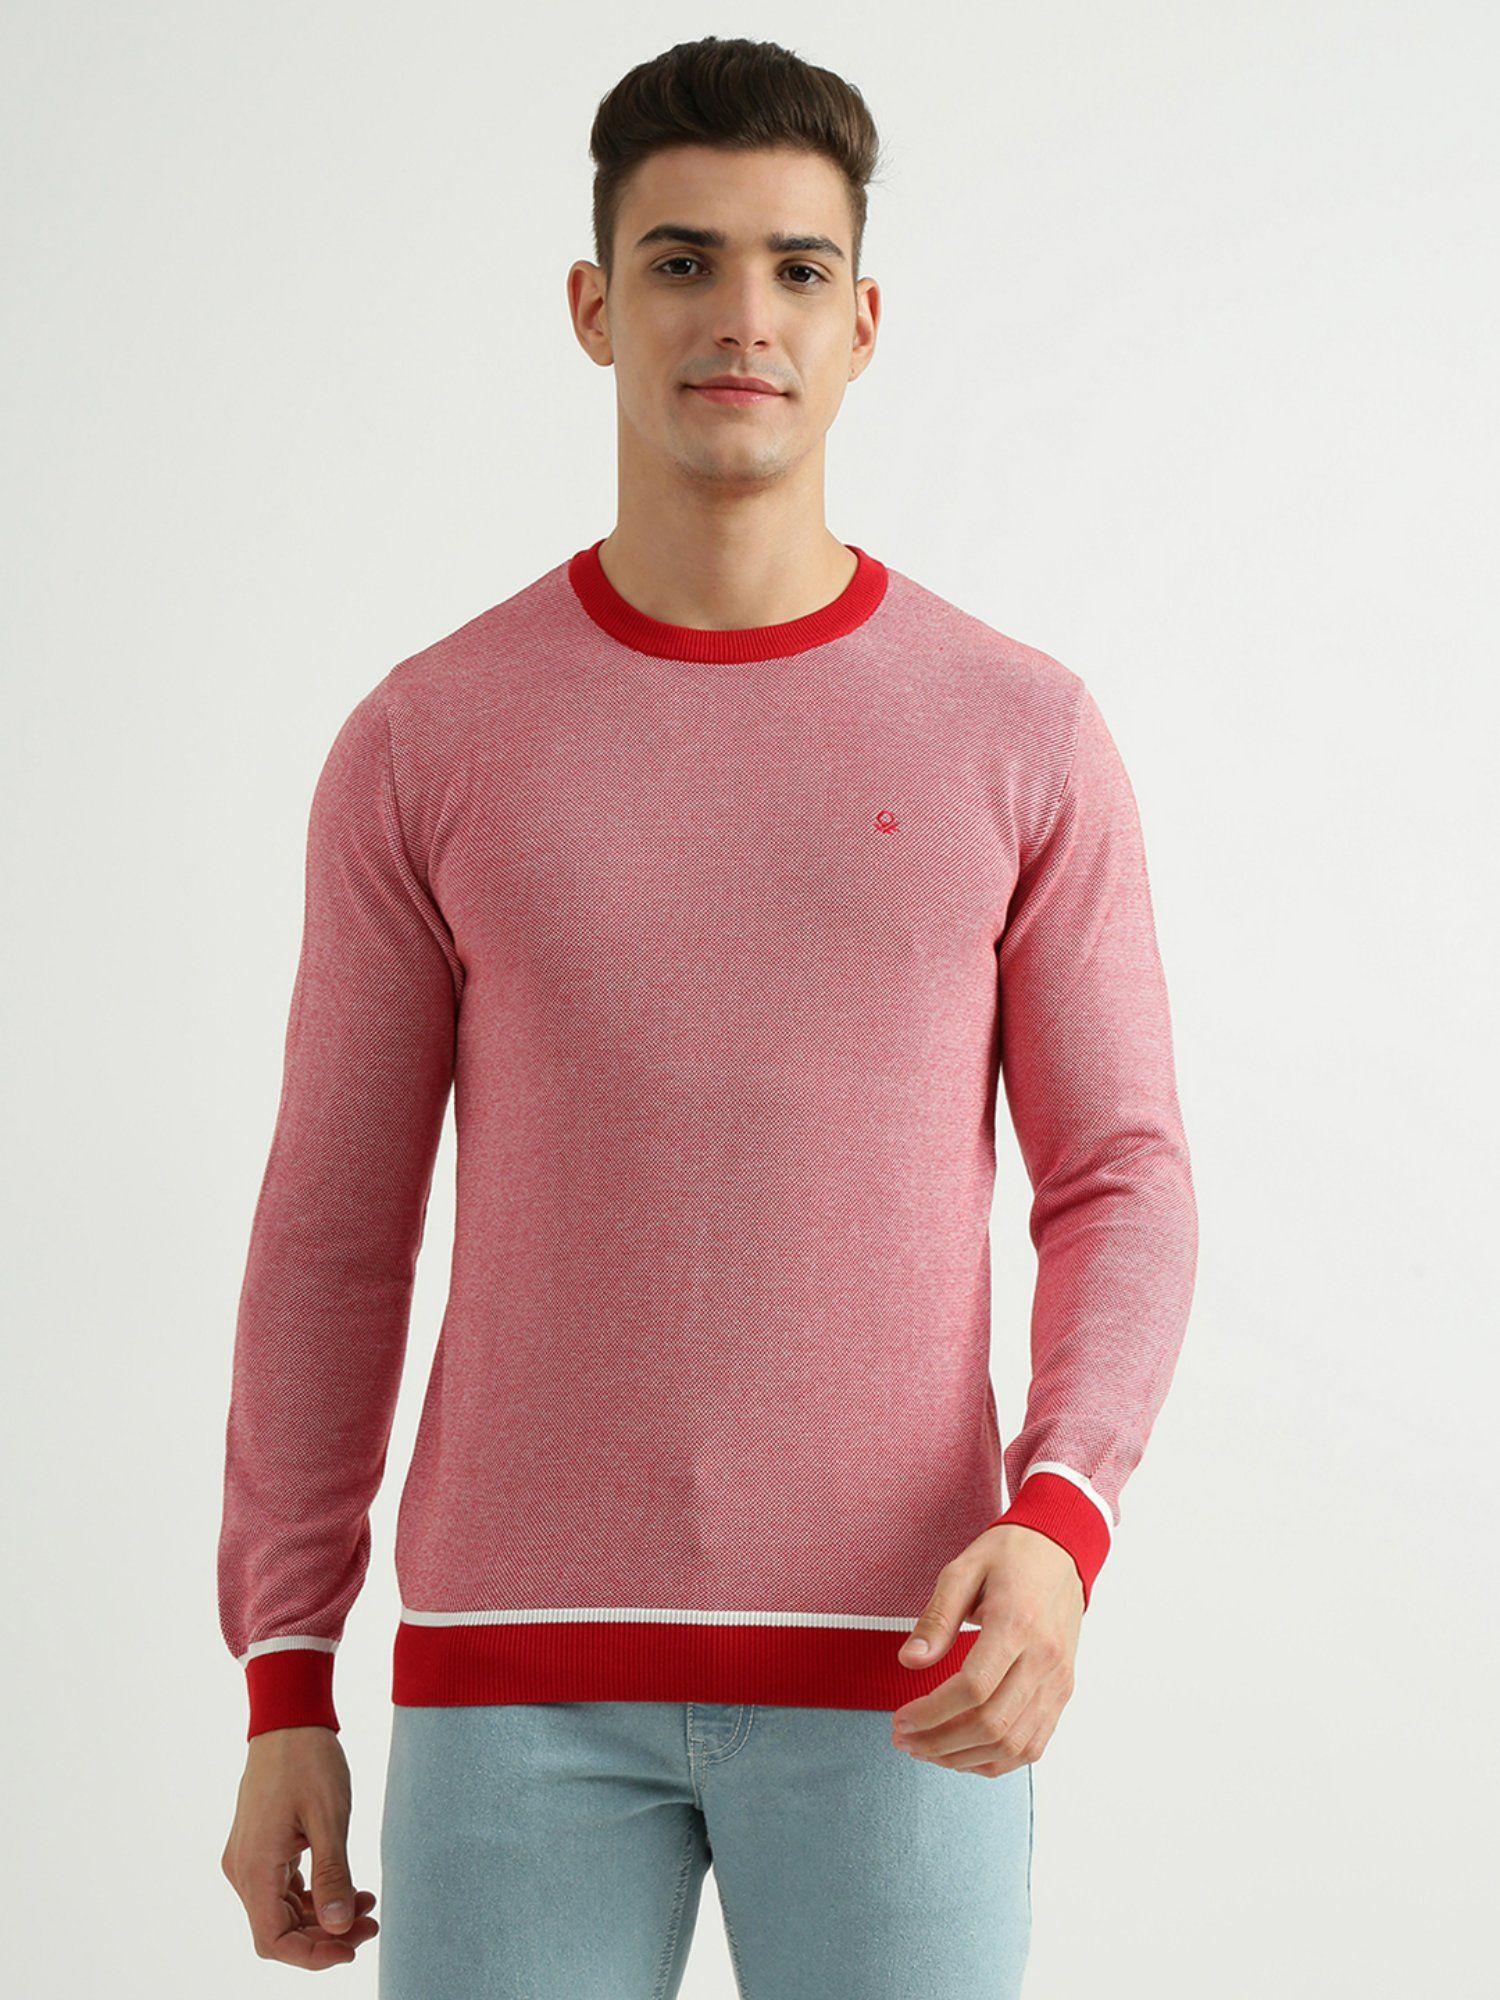 mens-long-sleeve-sweater-pink